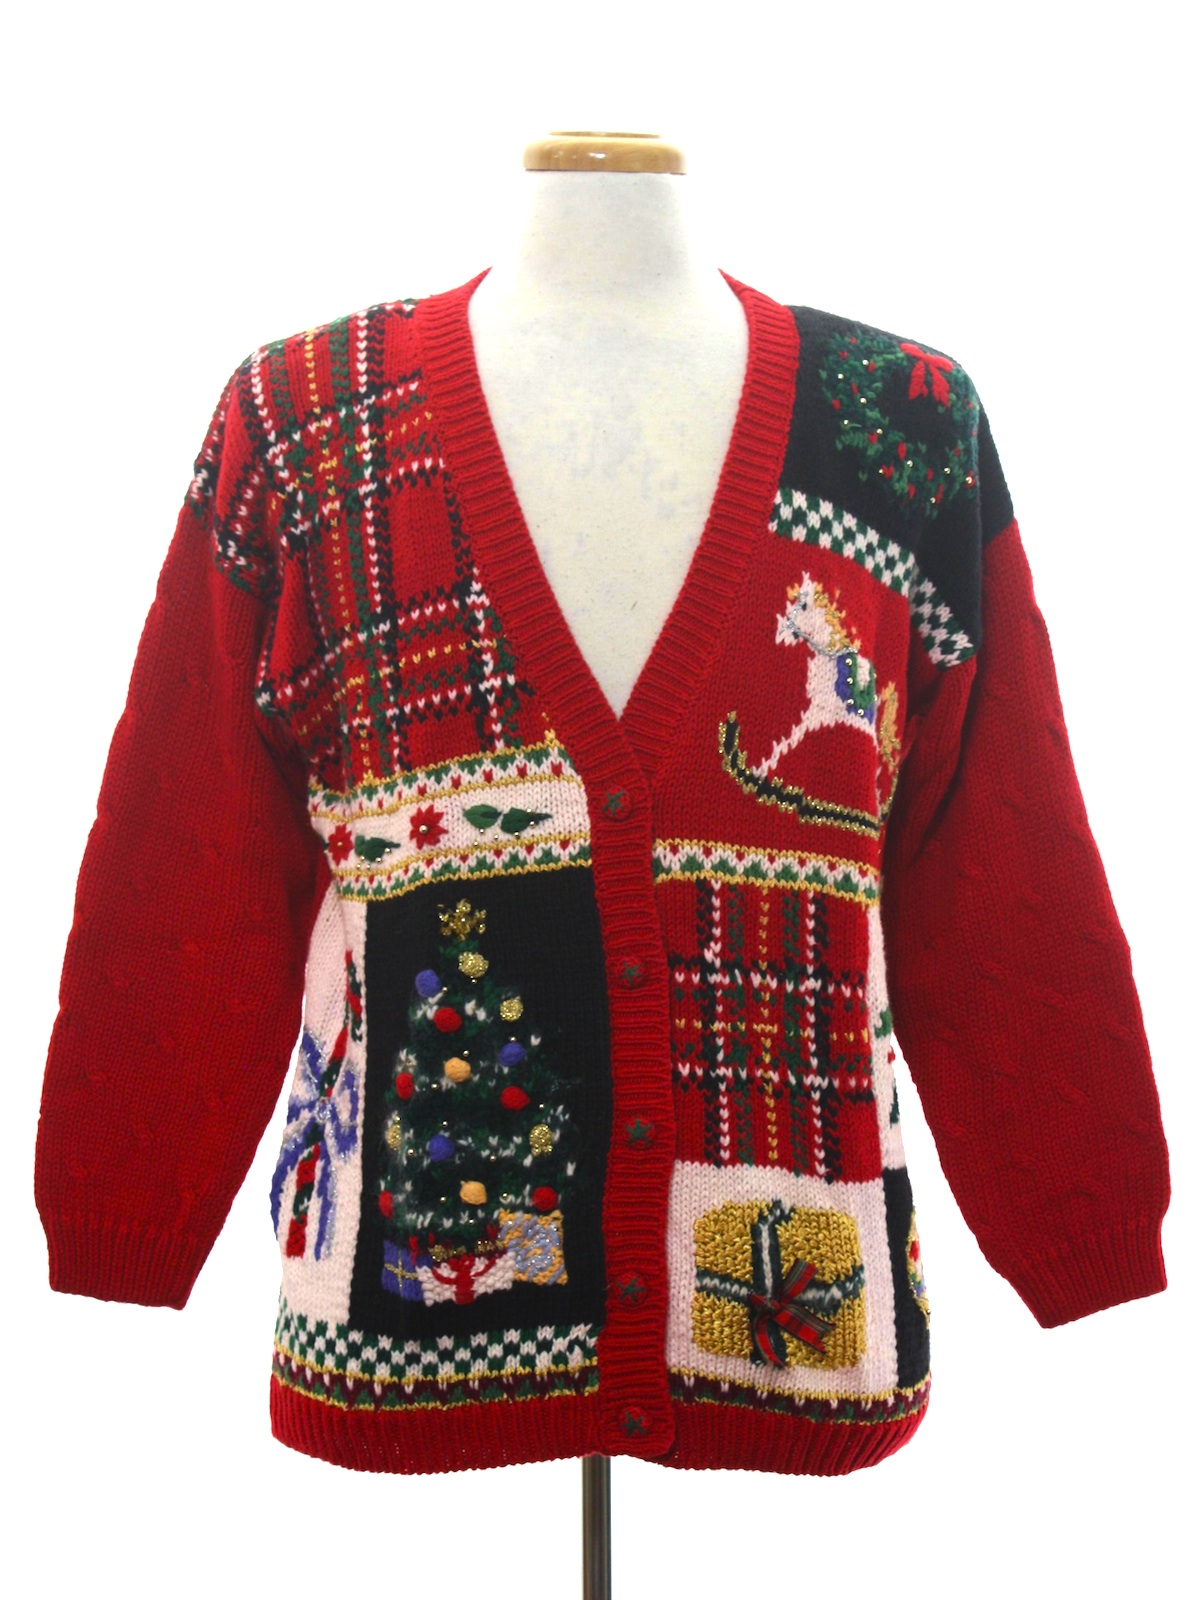 Ugly Christmas Cardigan Sweater: -Heirloom Collectibles- Unisex red ...